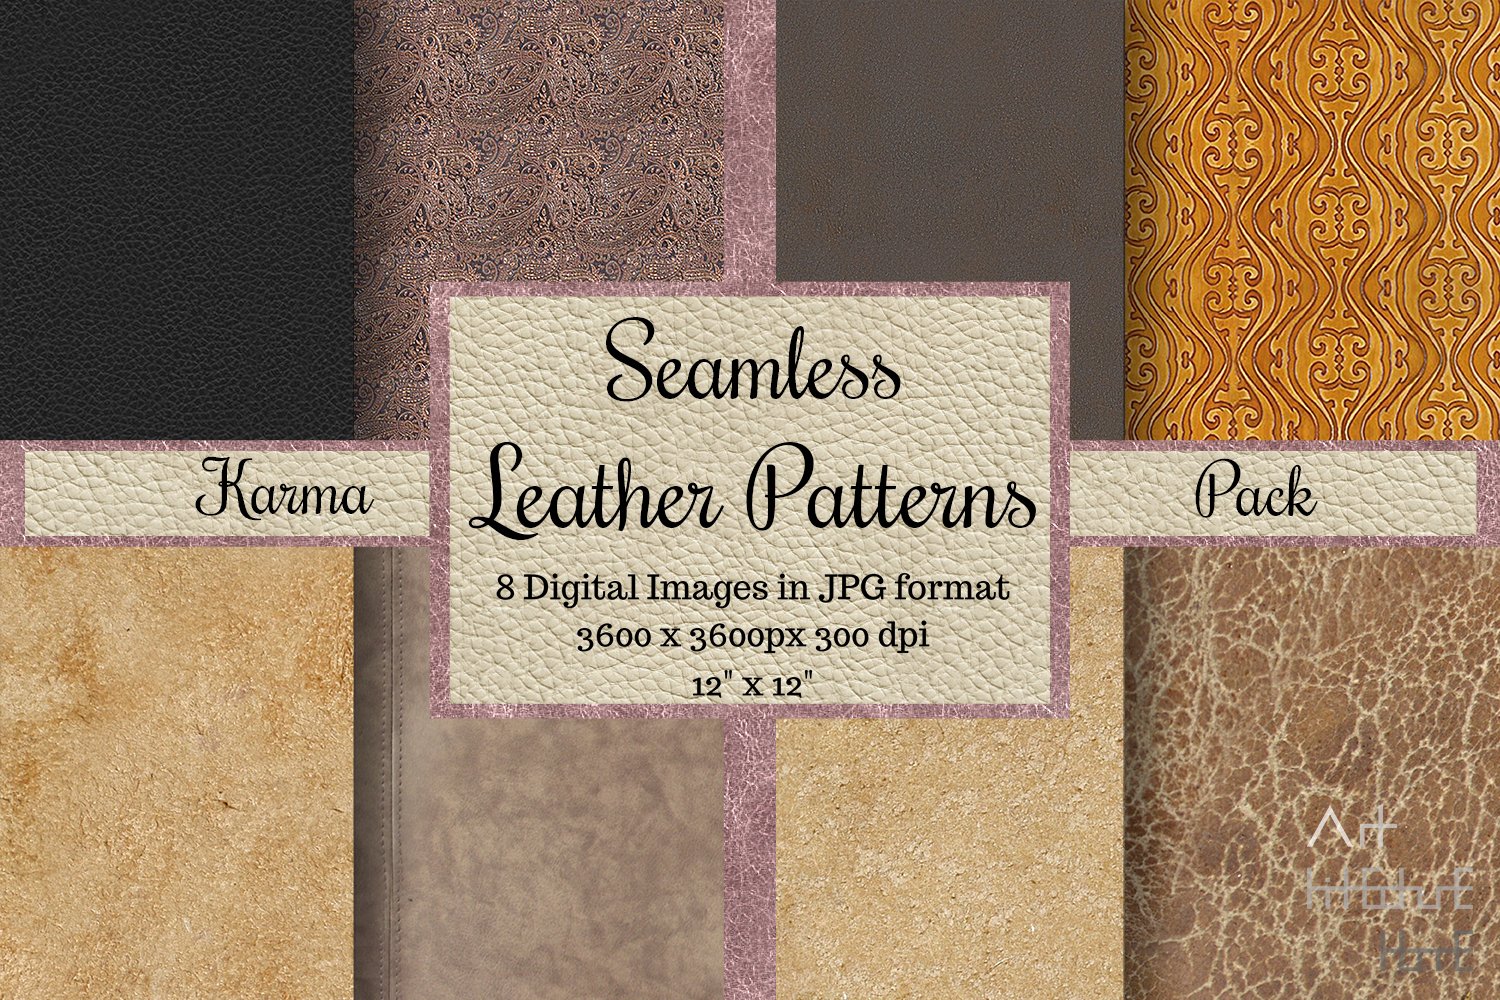 Seamless Leather Patterns - Karma cover image.